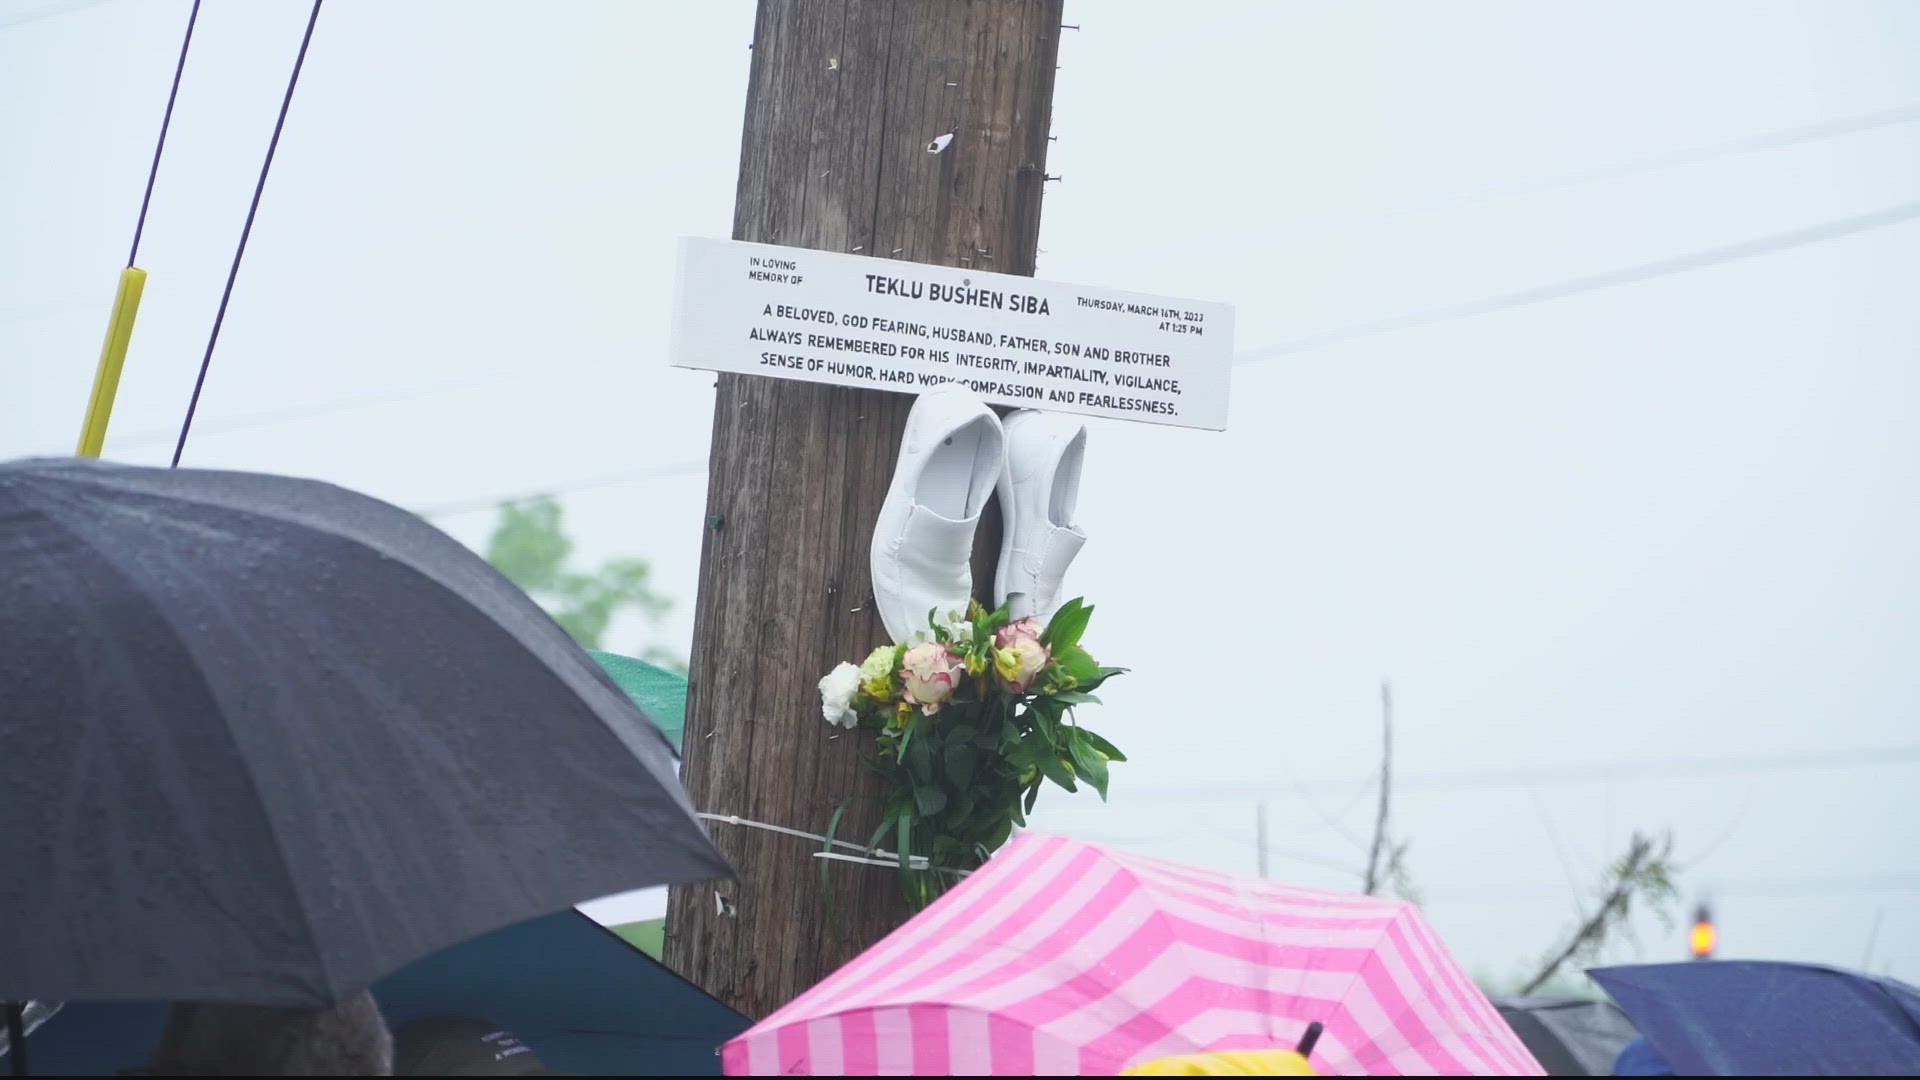 His memorial is intended to serve as a reminder for drivers to slow down.